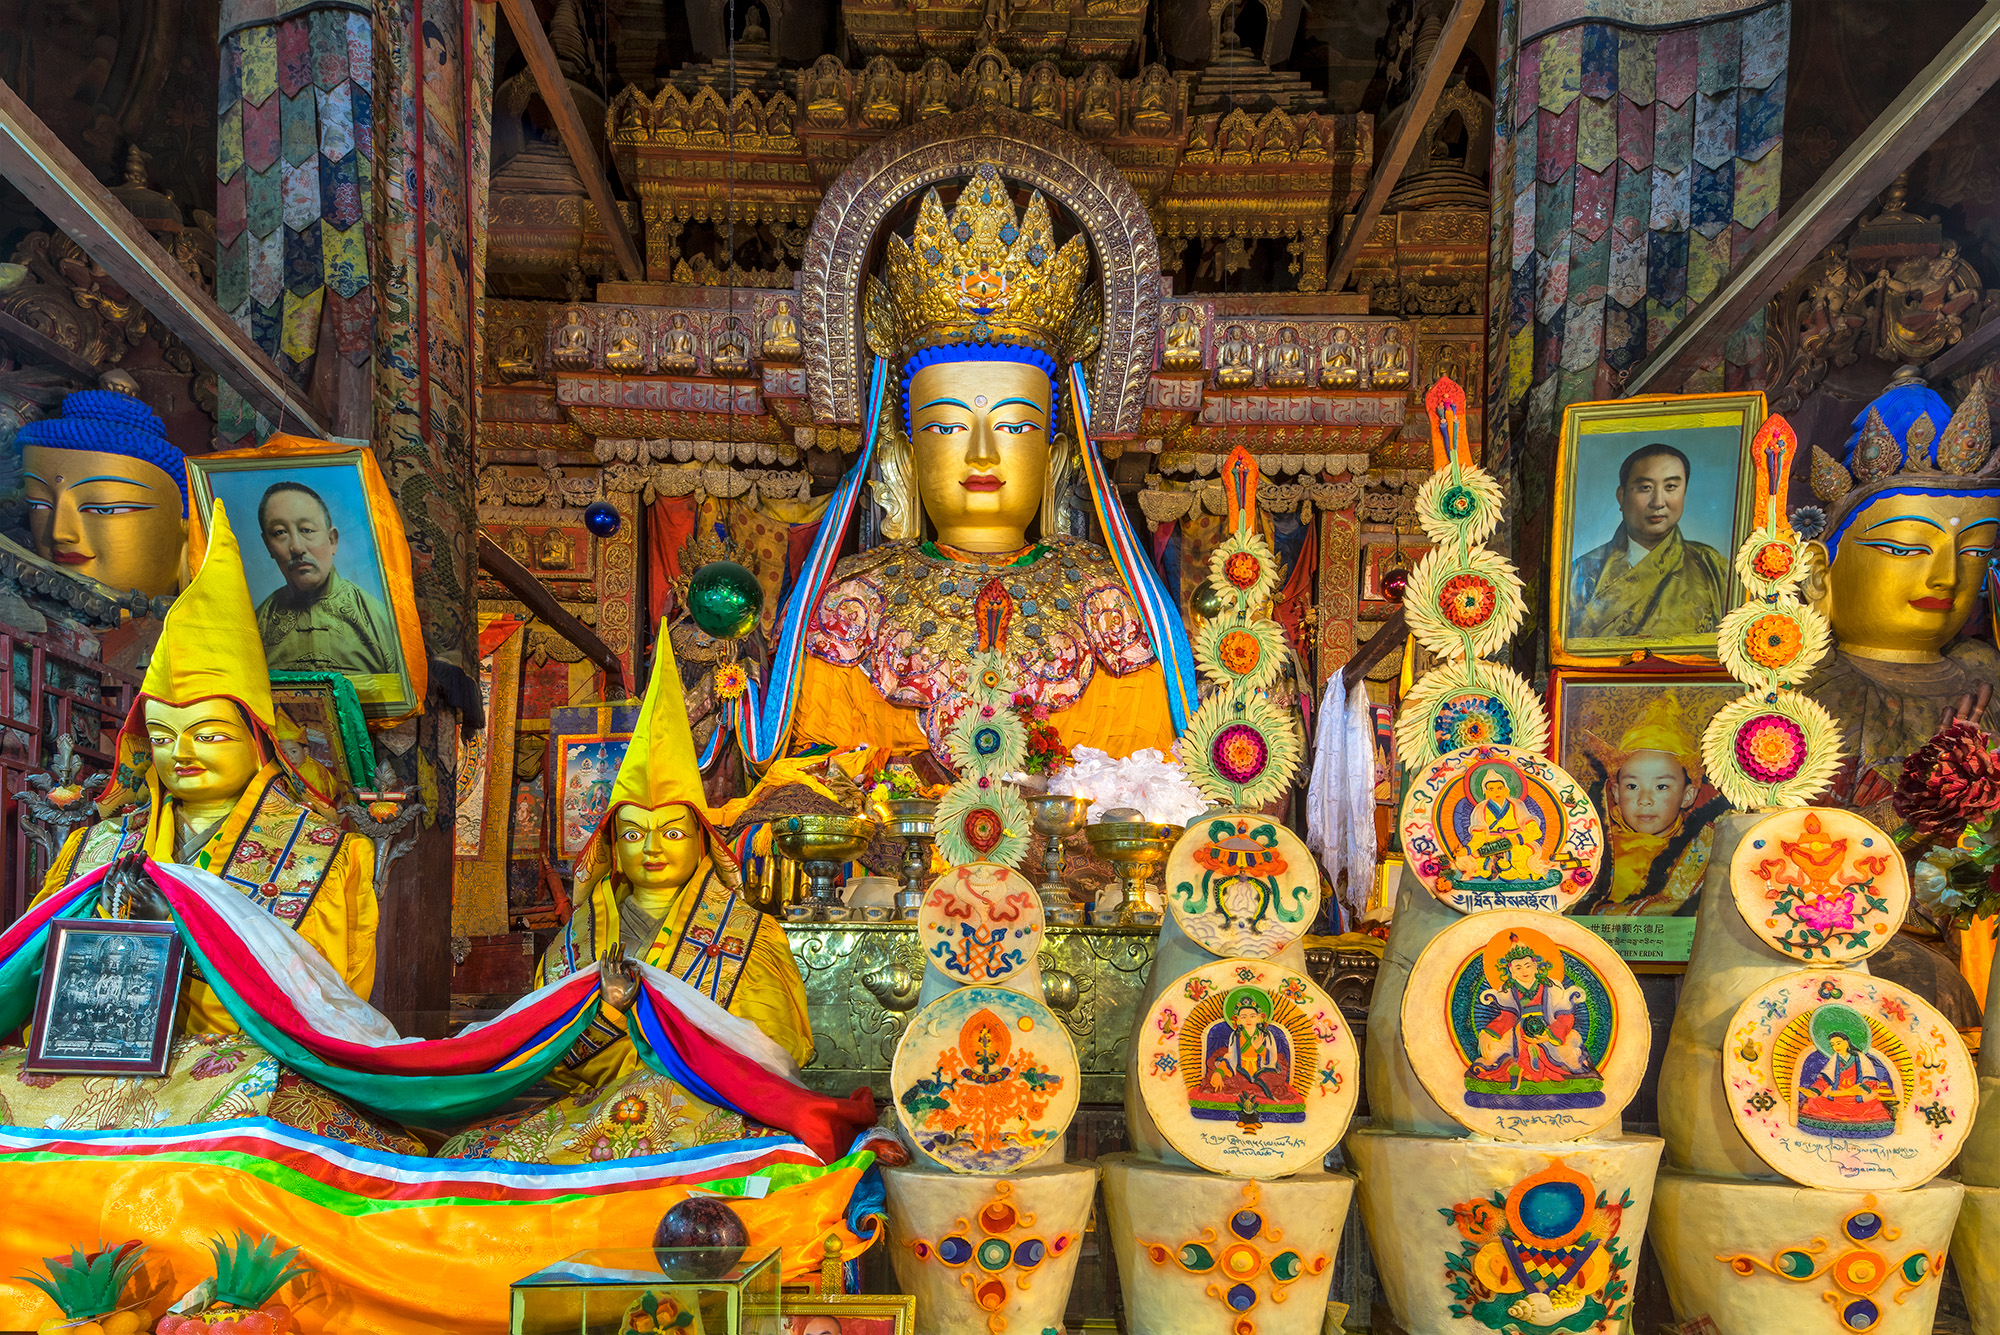 "Palcho Monastery's Vibrant Altar" provides a glimpse into the spiritual richness of the Palcho Monastery in Gyantse, Tibet....